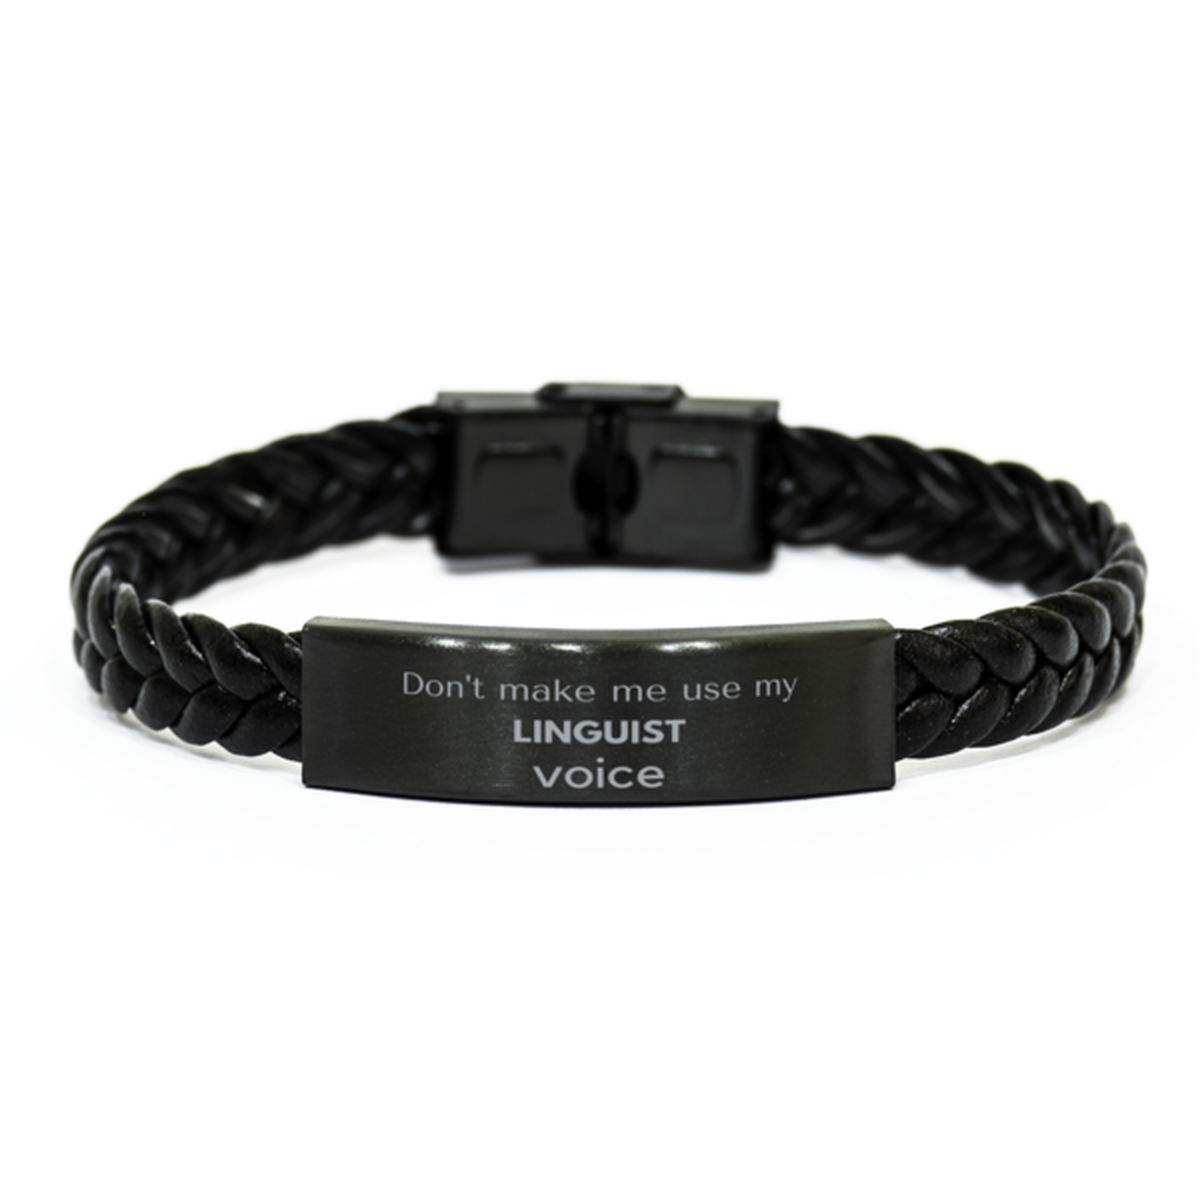 Don't make me use my Linguist voice, Sarcasm Linguist Gifts, Christmas Linguist Braided Leather Bracelet Birthday Unique Gifts For Linguist Coworkers, Men, Women, Colleague, Friends